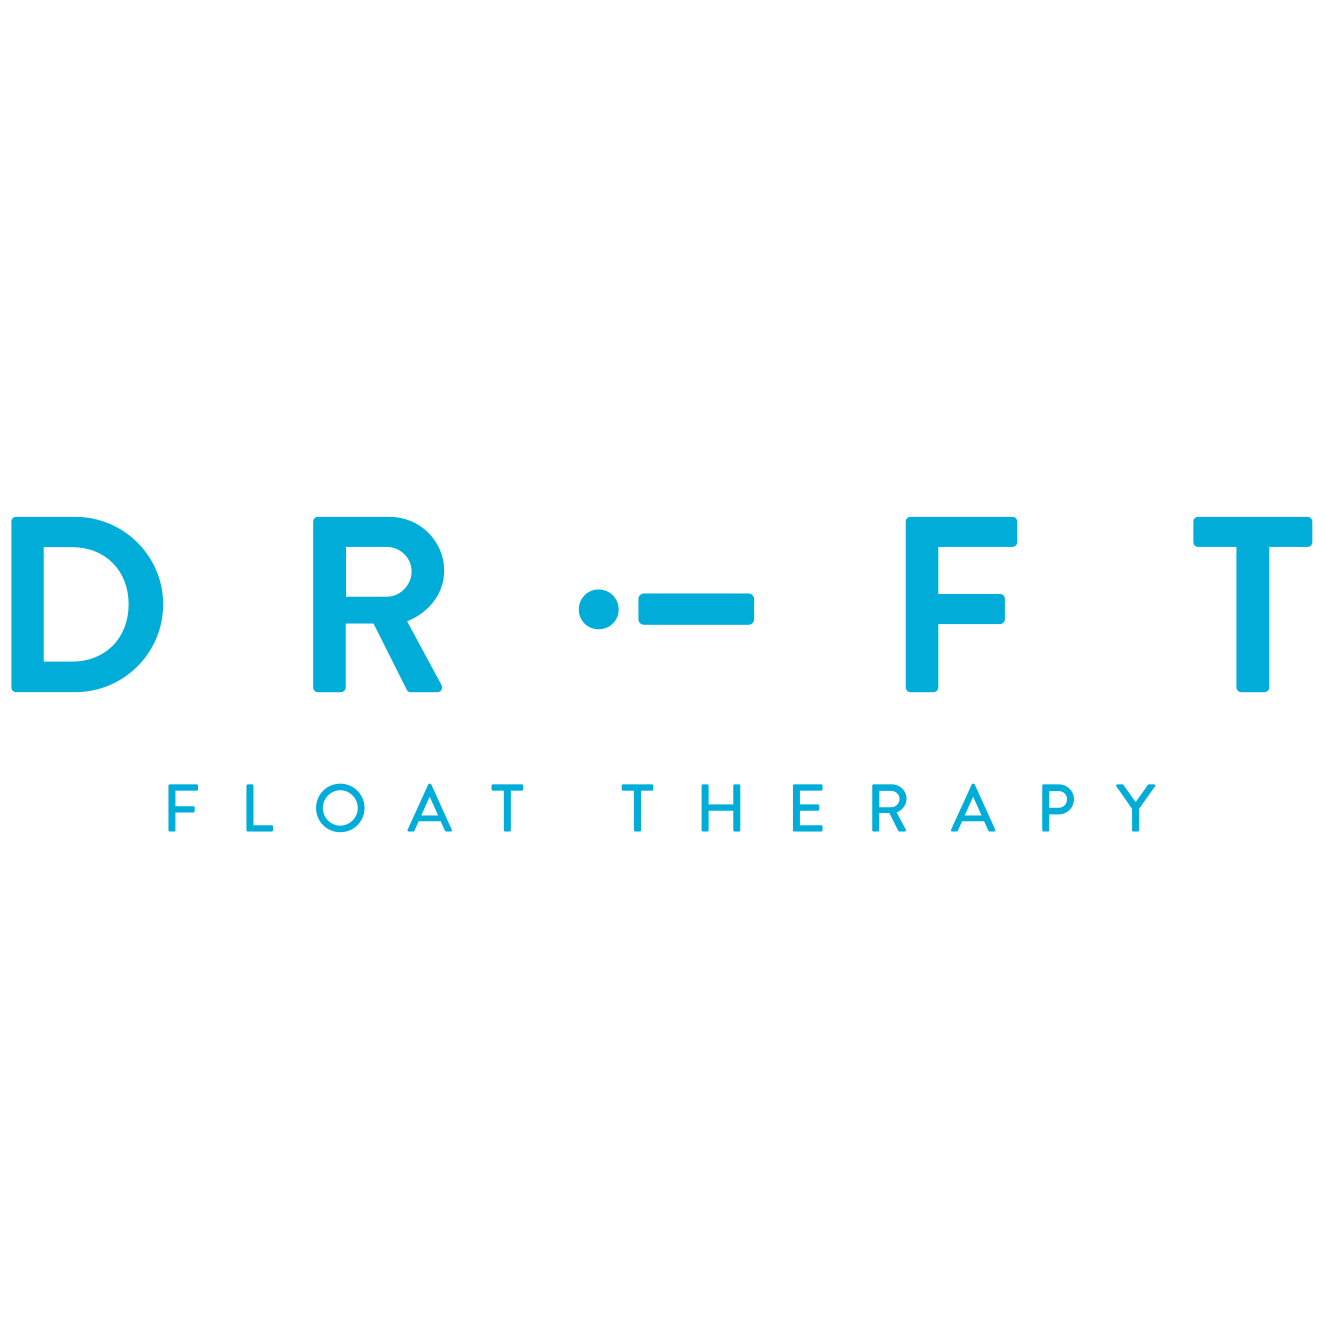 Drift Float Therapy